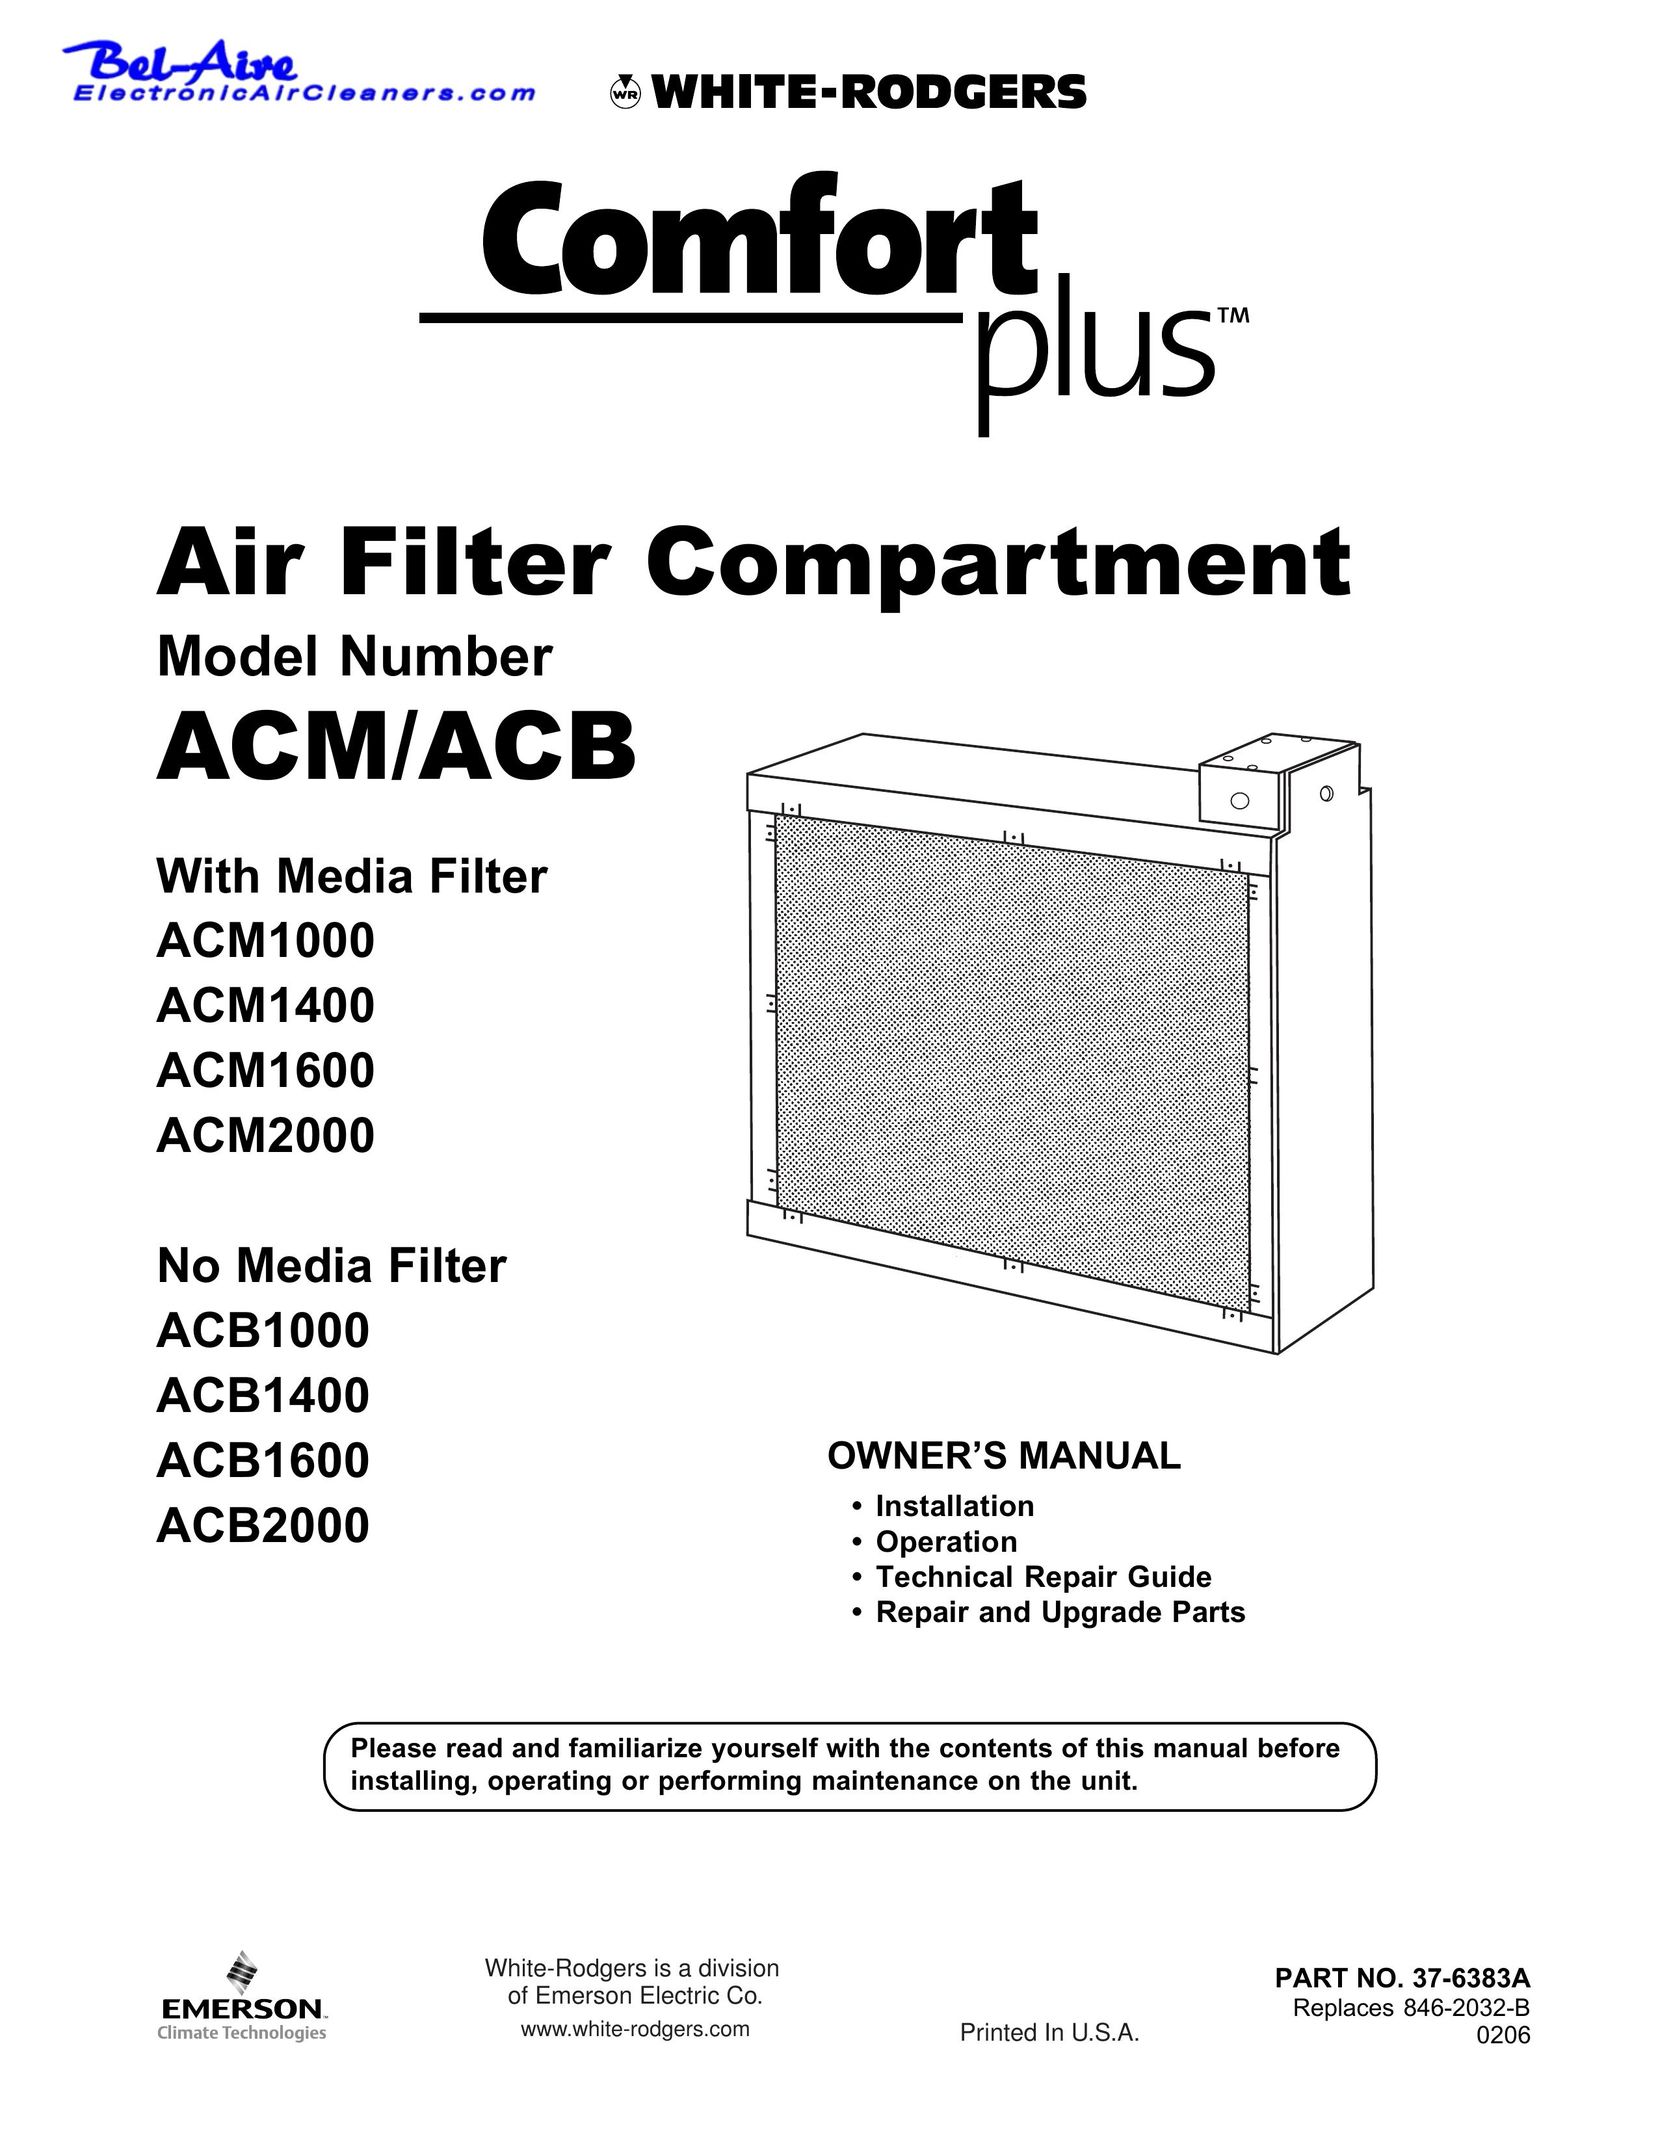 White Rodgers ACB1000 Air Cleaner User Manual